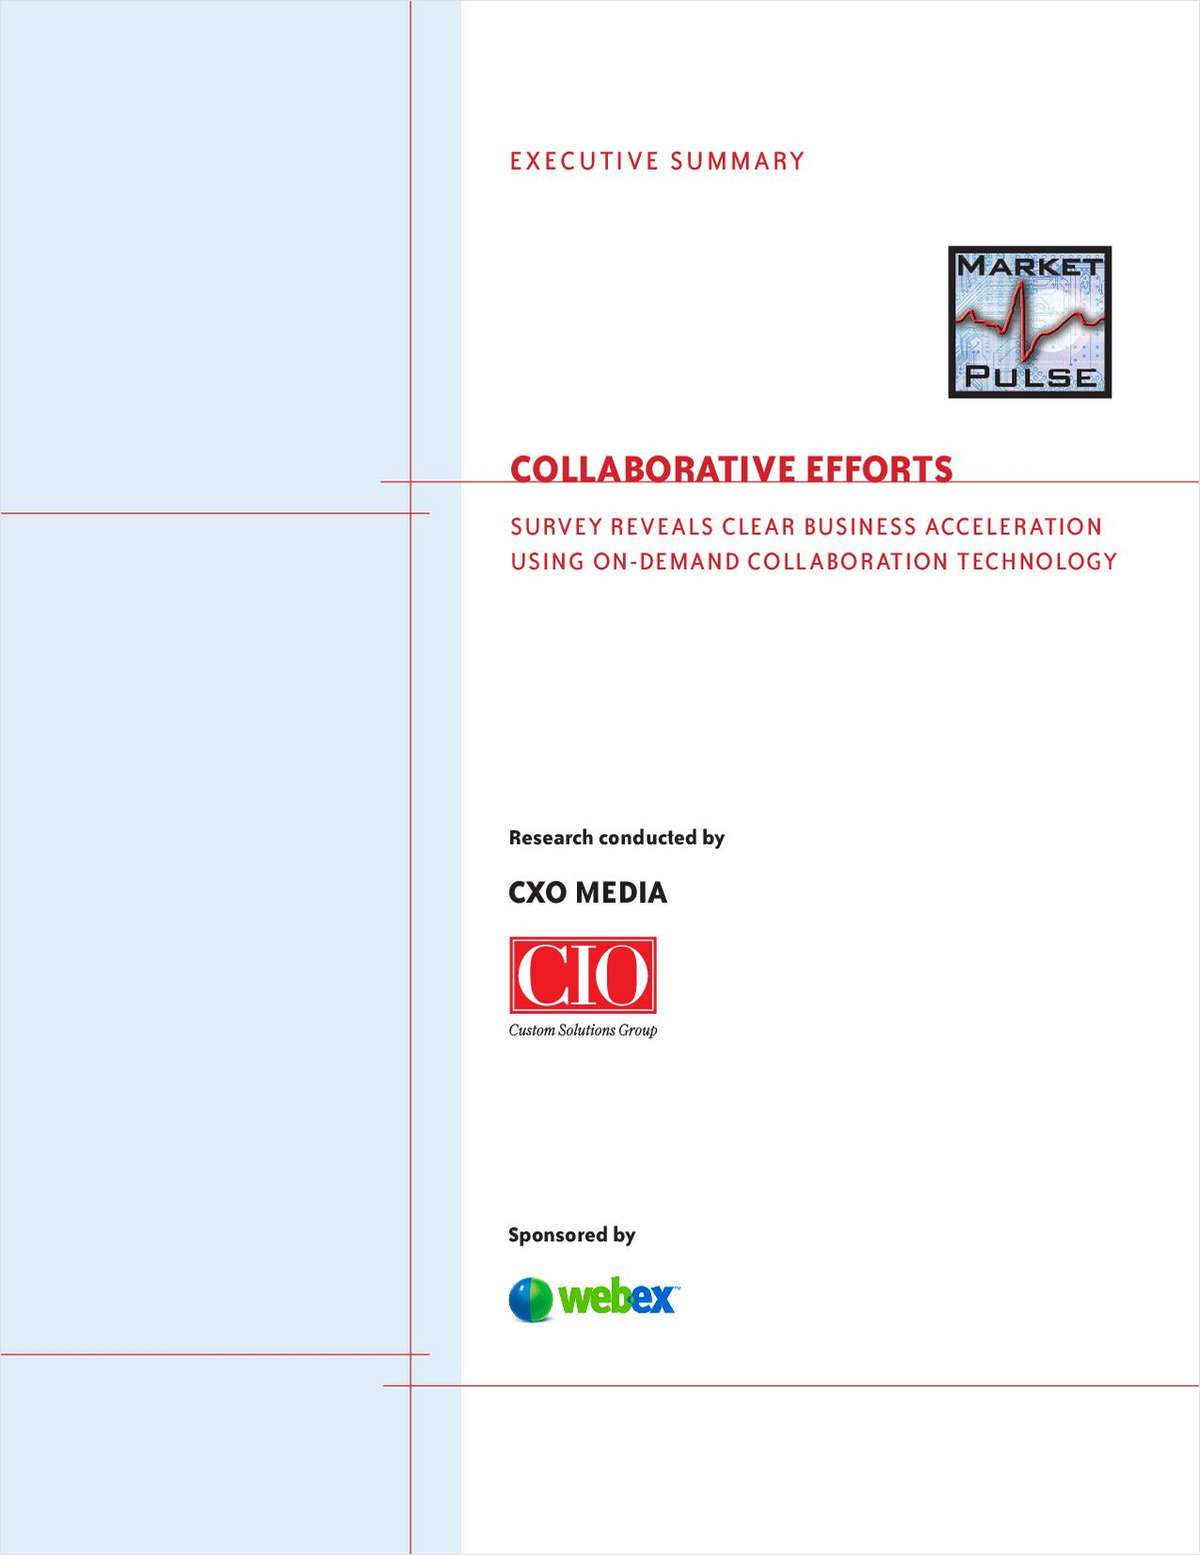 Collaborative Efforts: Survey Reveals Clear Business Acceleration Using On-Demand Collaboration Technology